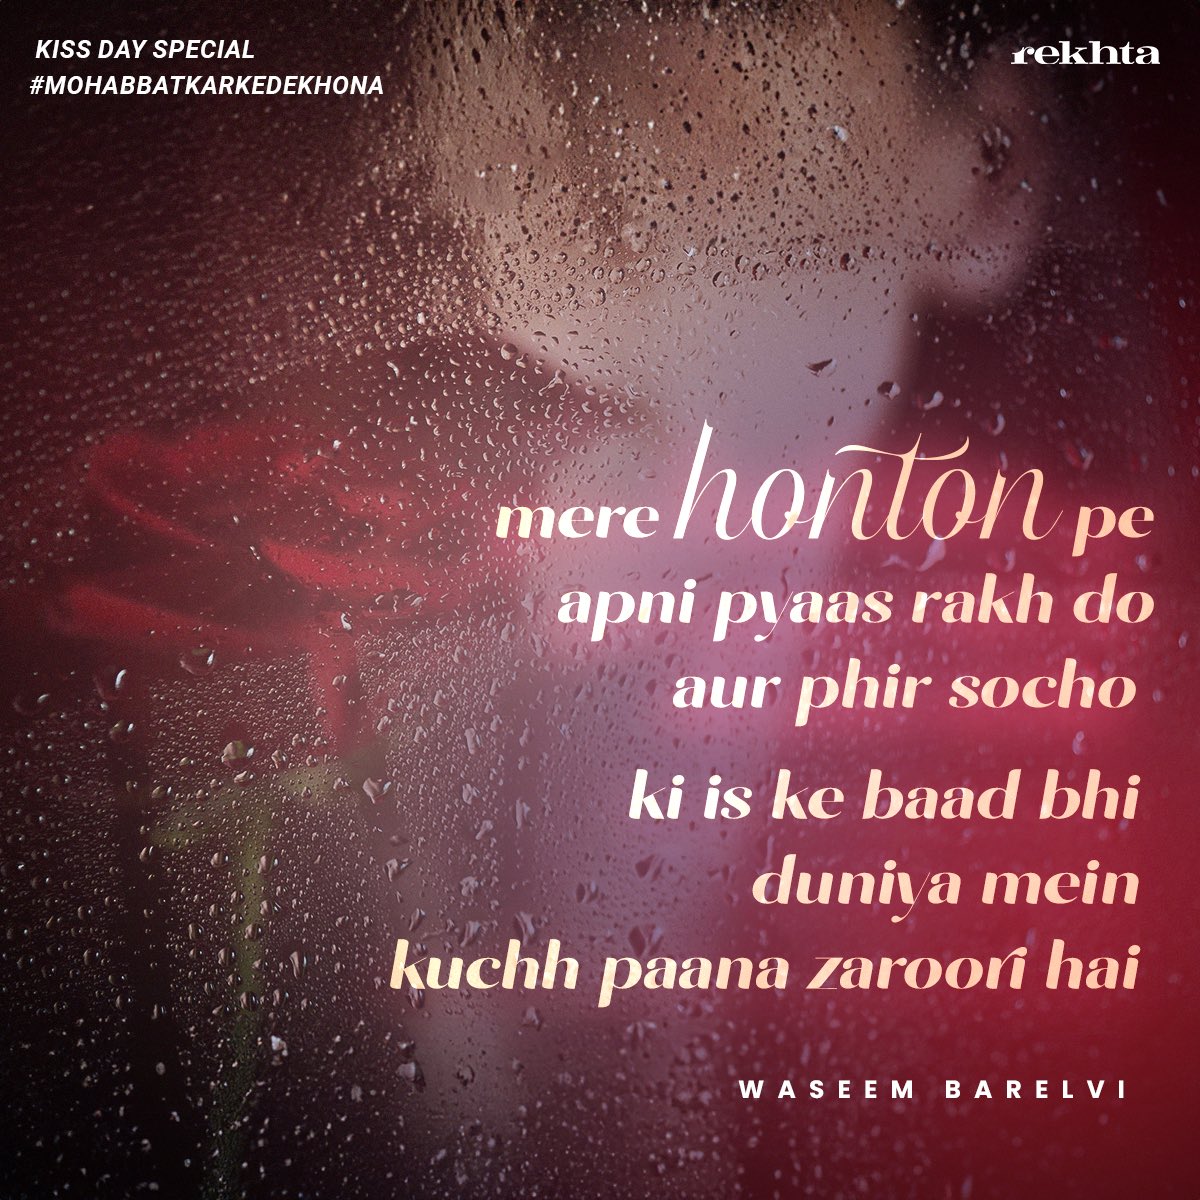 #KissDay • Embracing the beauty of affection with a gentle touch of love. Celebrating the sweetness that bonds us together. Spread love, kindness, and warmth wherever you go.

#MohabbatKarKeDekhoNa #ValentinesWeek #valentines #rekhta #urdu #urdupoetry